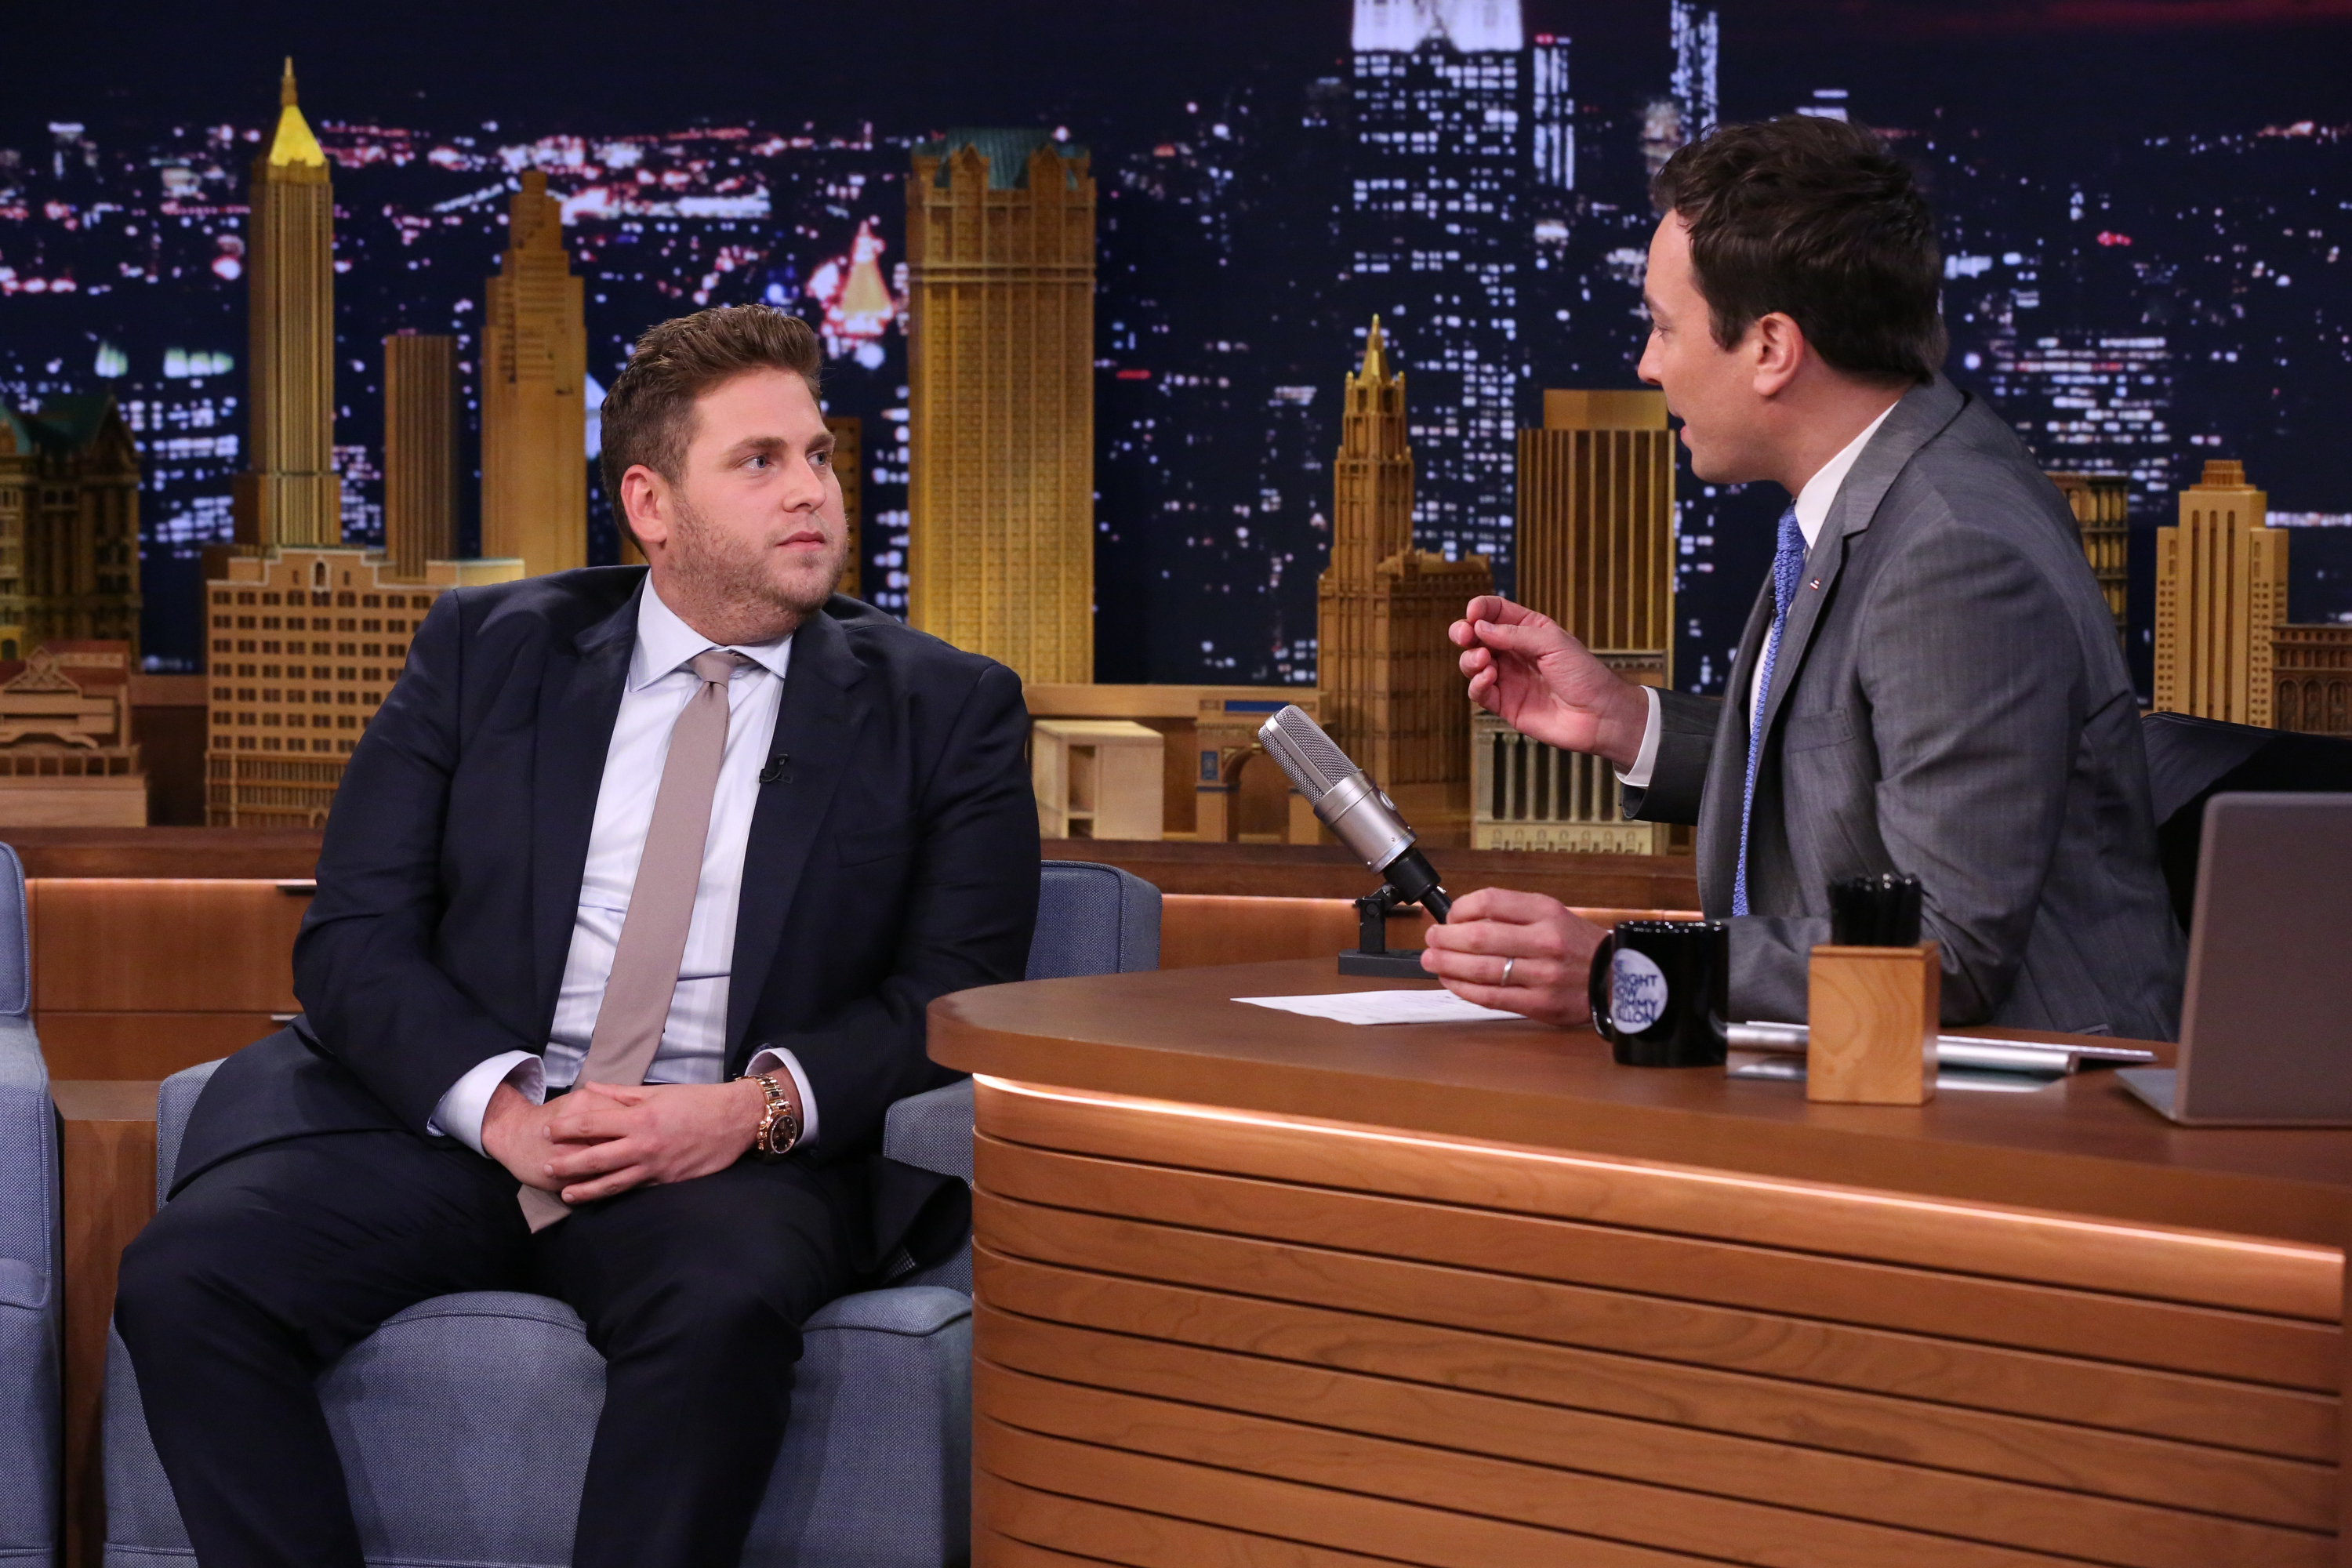 Jonah Hill during an interview with host Jimmy Fallon on June 3, 2014. (NBC—NBCU Photo Bank via Getty Images)